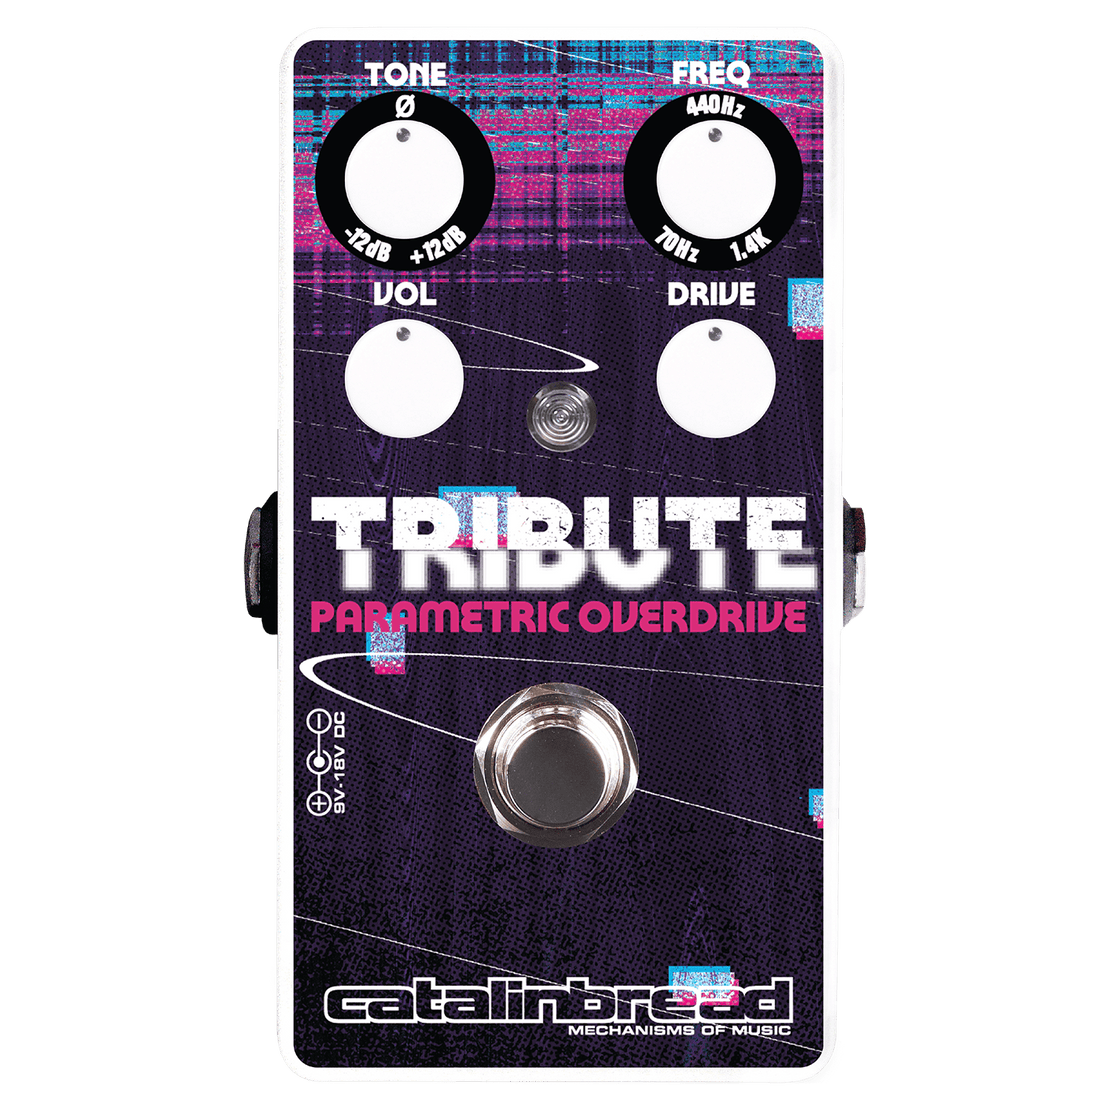 Tribute Parametric Overdrive (Limited Edition)